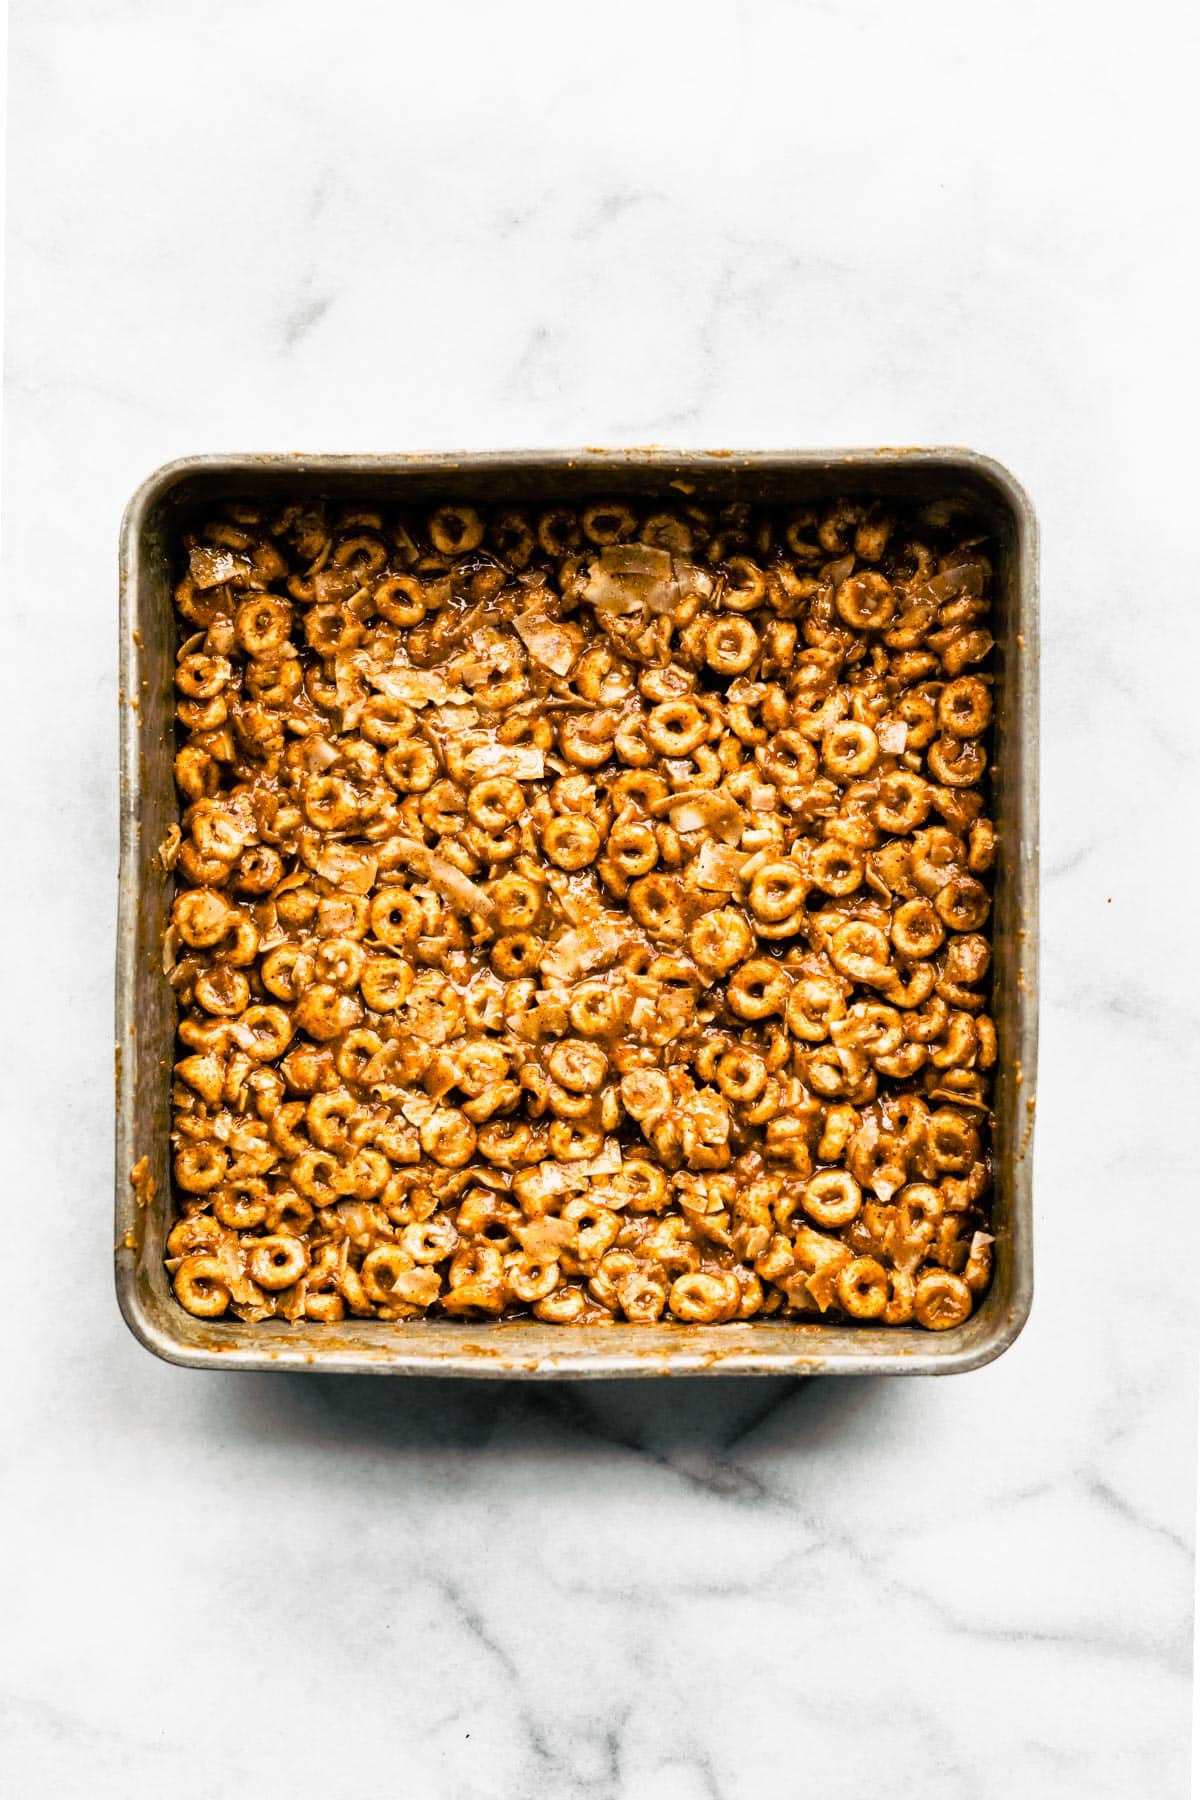 A pan of no bake gluten free cereal bars on a white marble countertop.